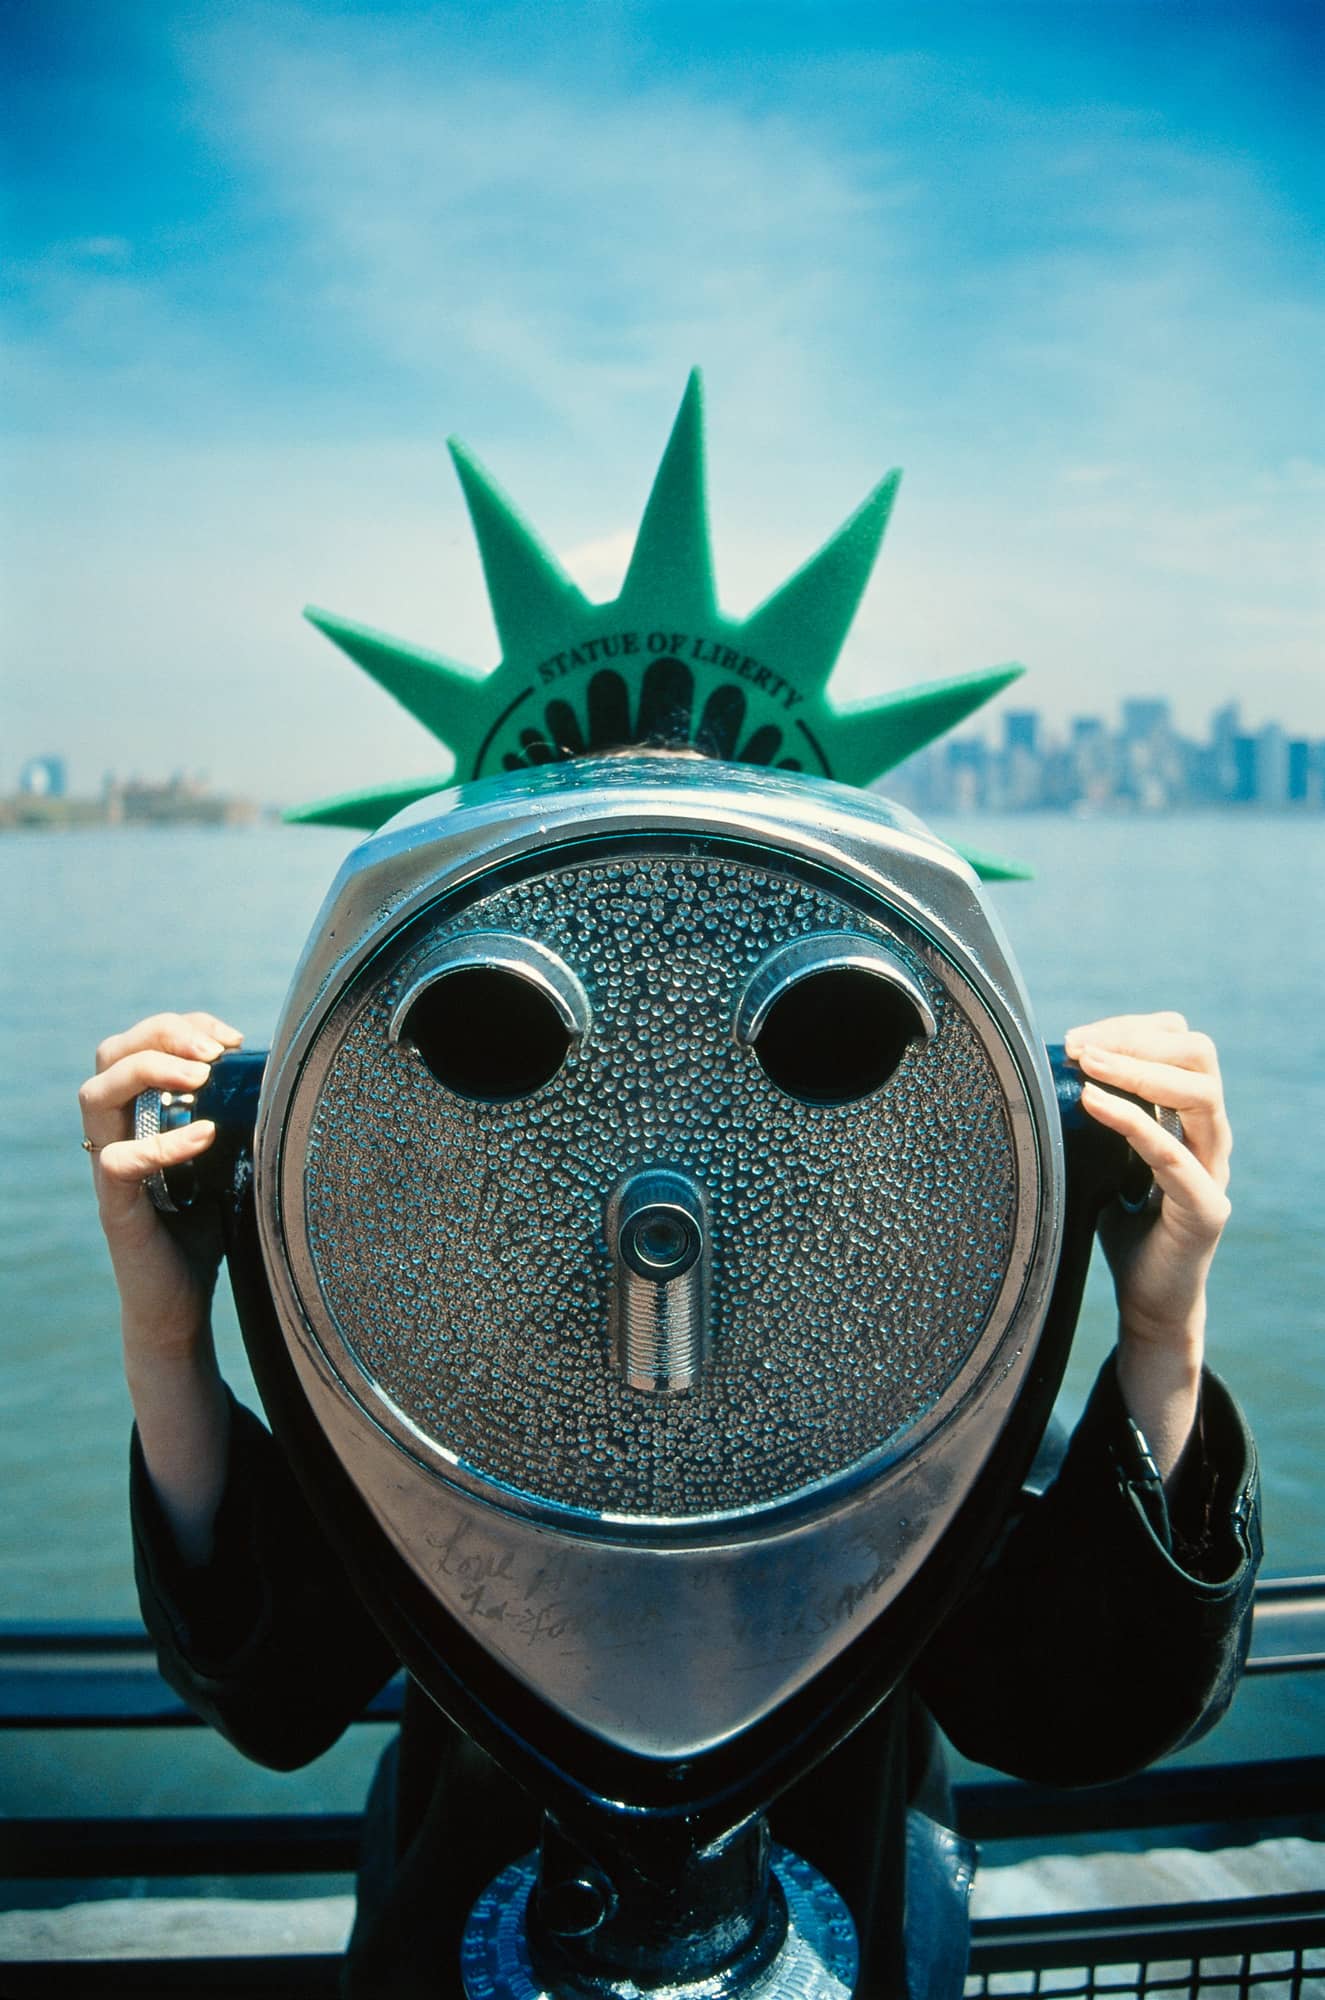 Kid wearing a statue of liberty hat looking through a viewfinder in New York